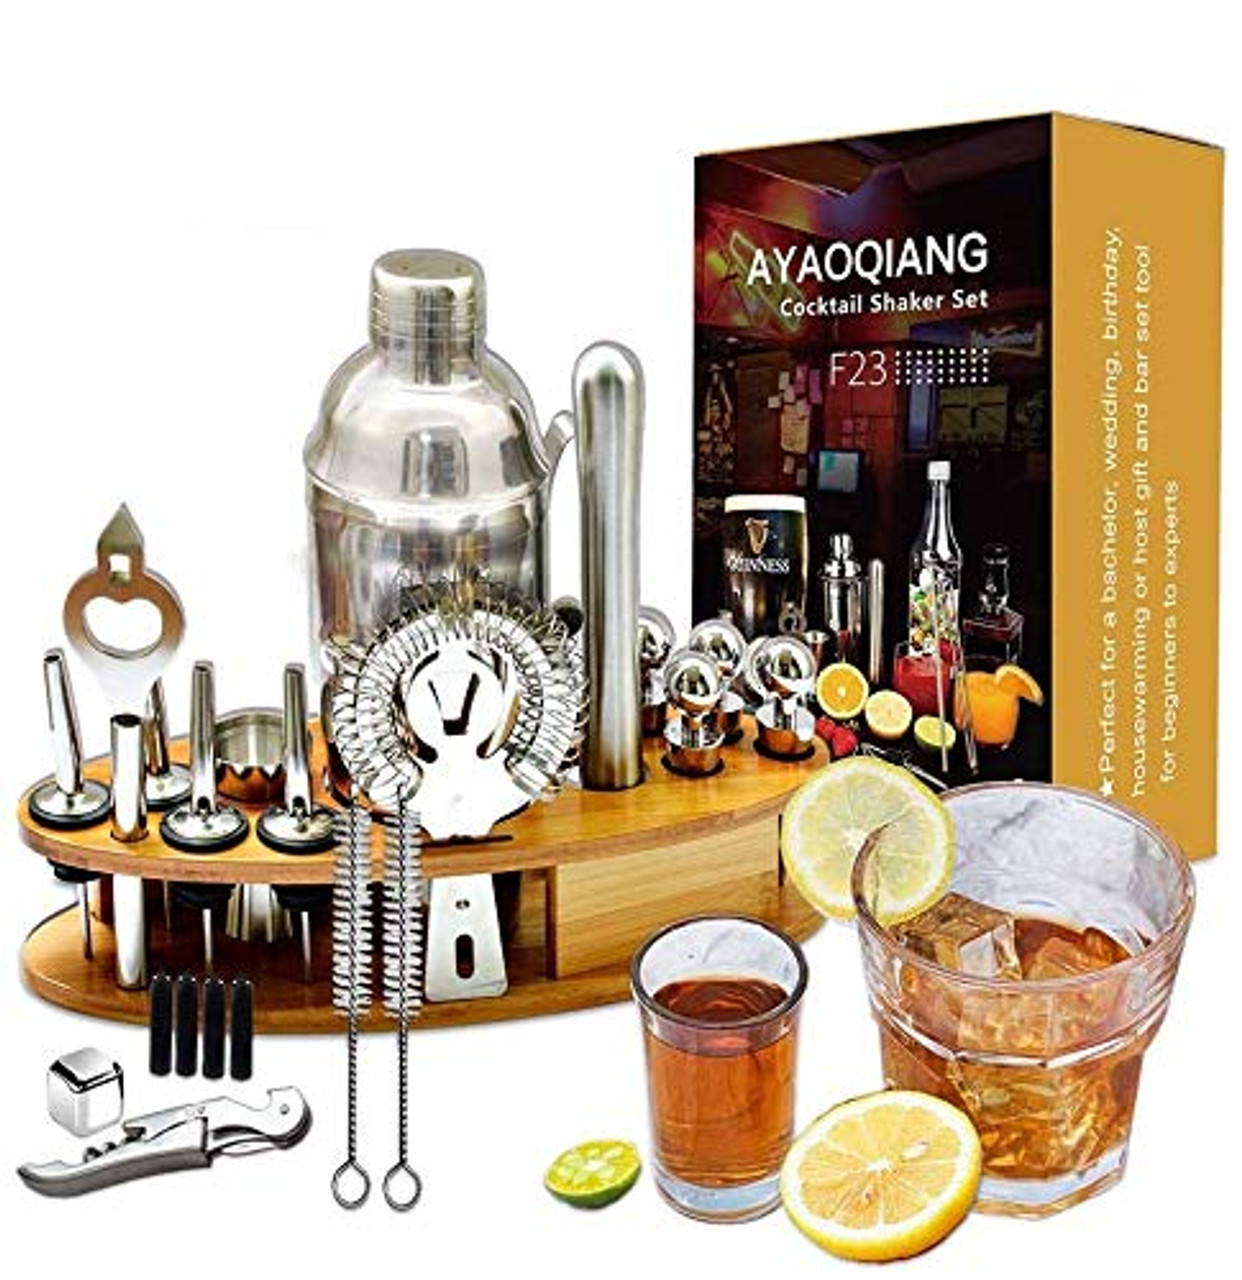 Stainless Steel Bar Set Bamboo Holder Kit Accessories Cocktail